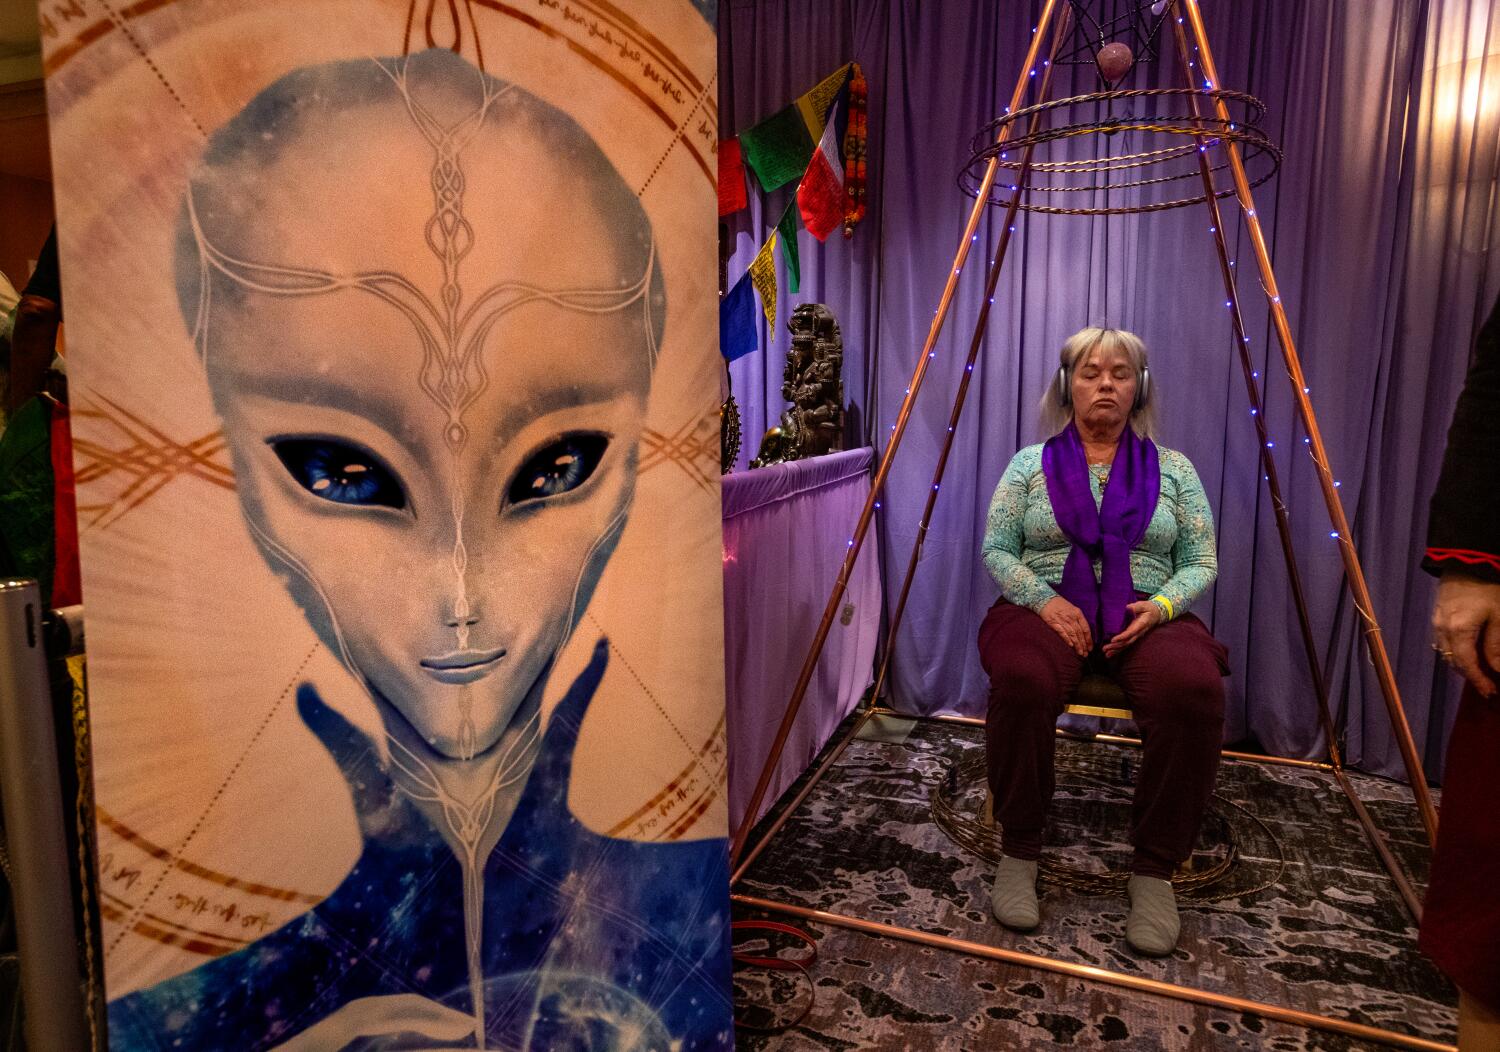 'It's a lot of UFO stuff and a lot of healing': Inside L.A.'s wackiest spiritual convention